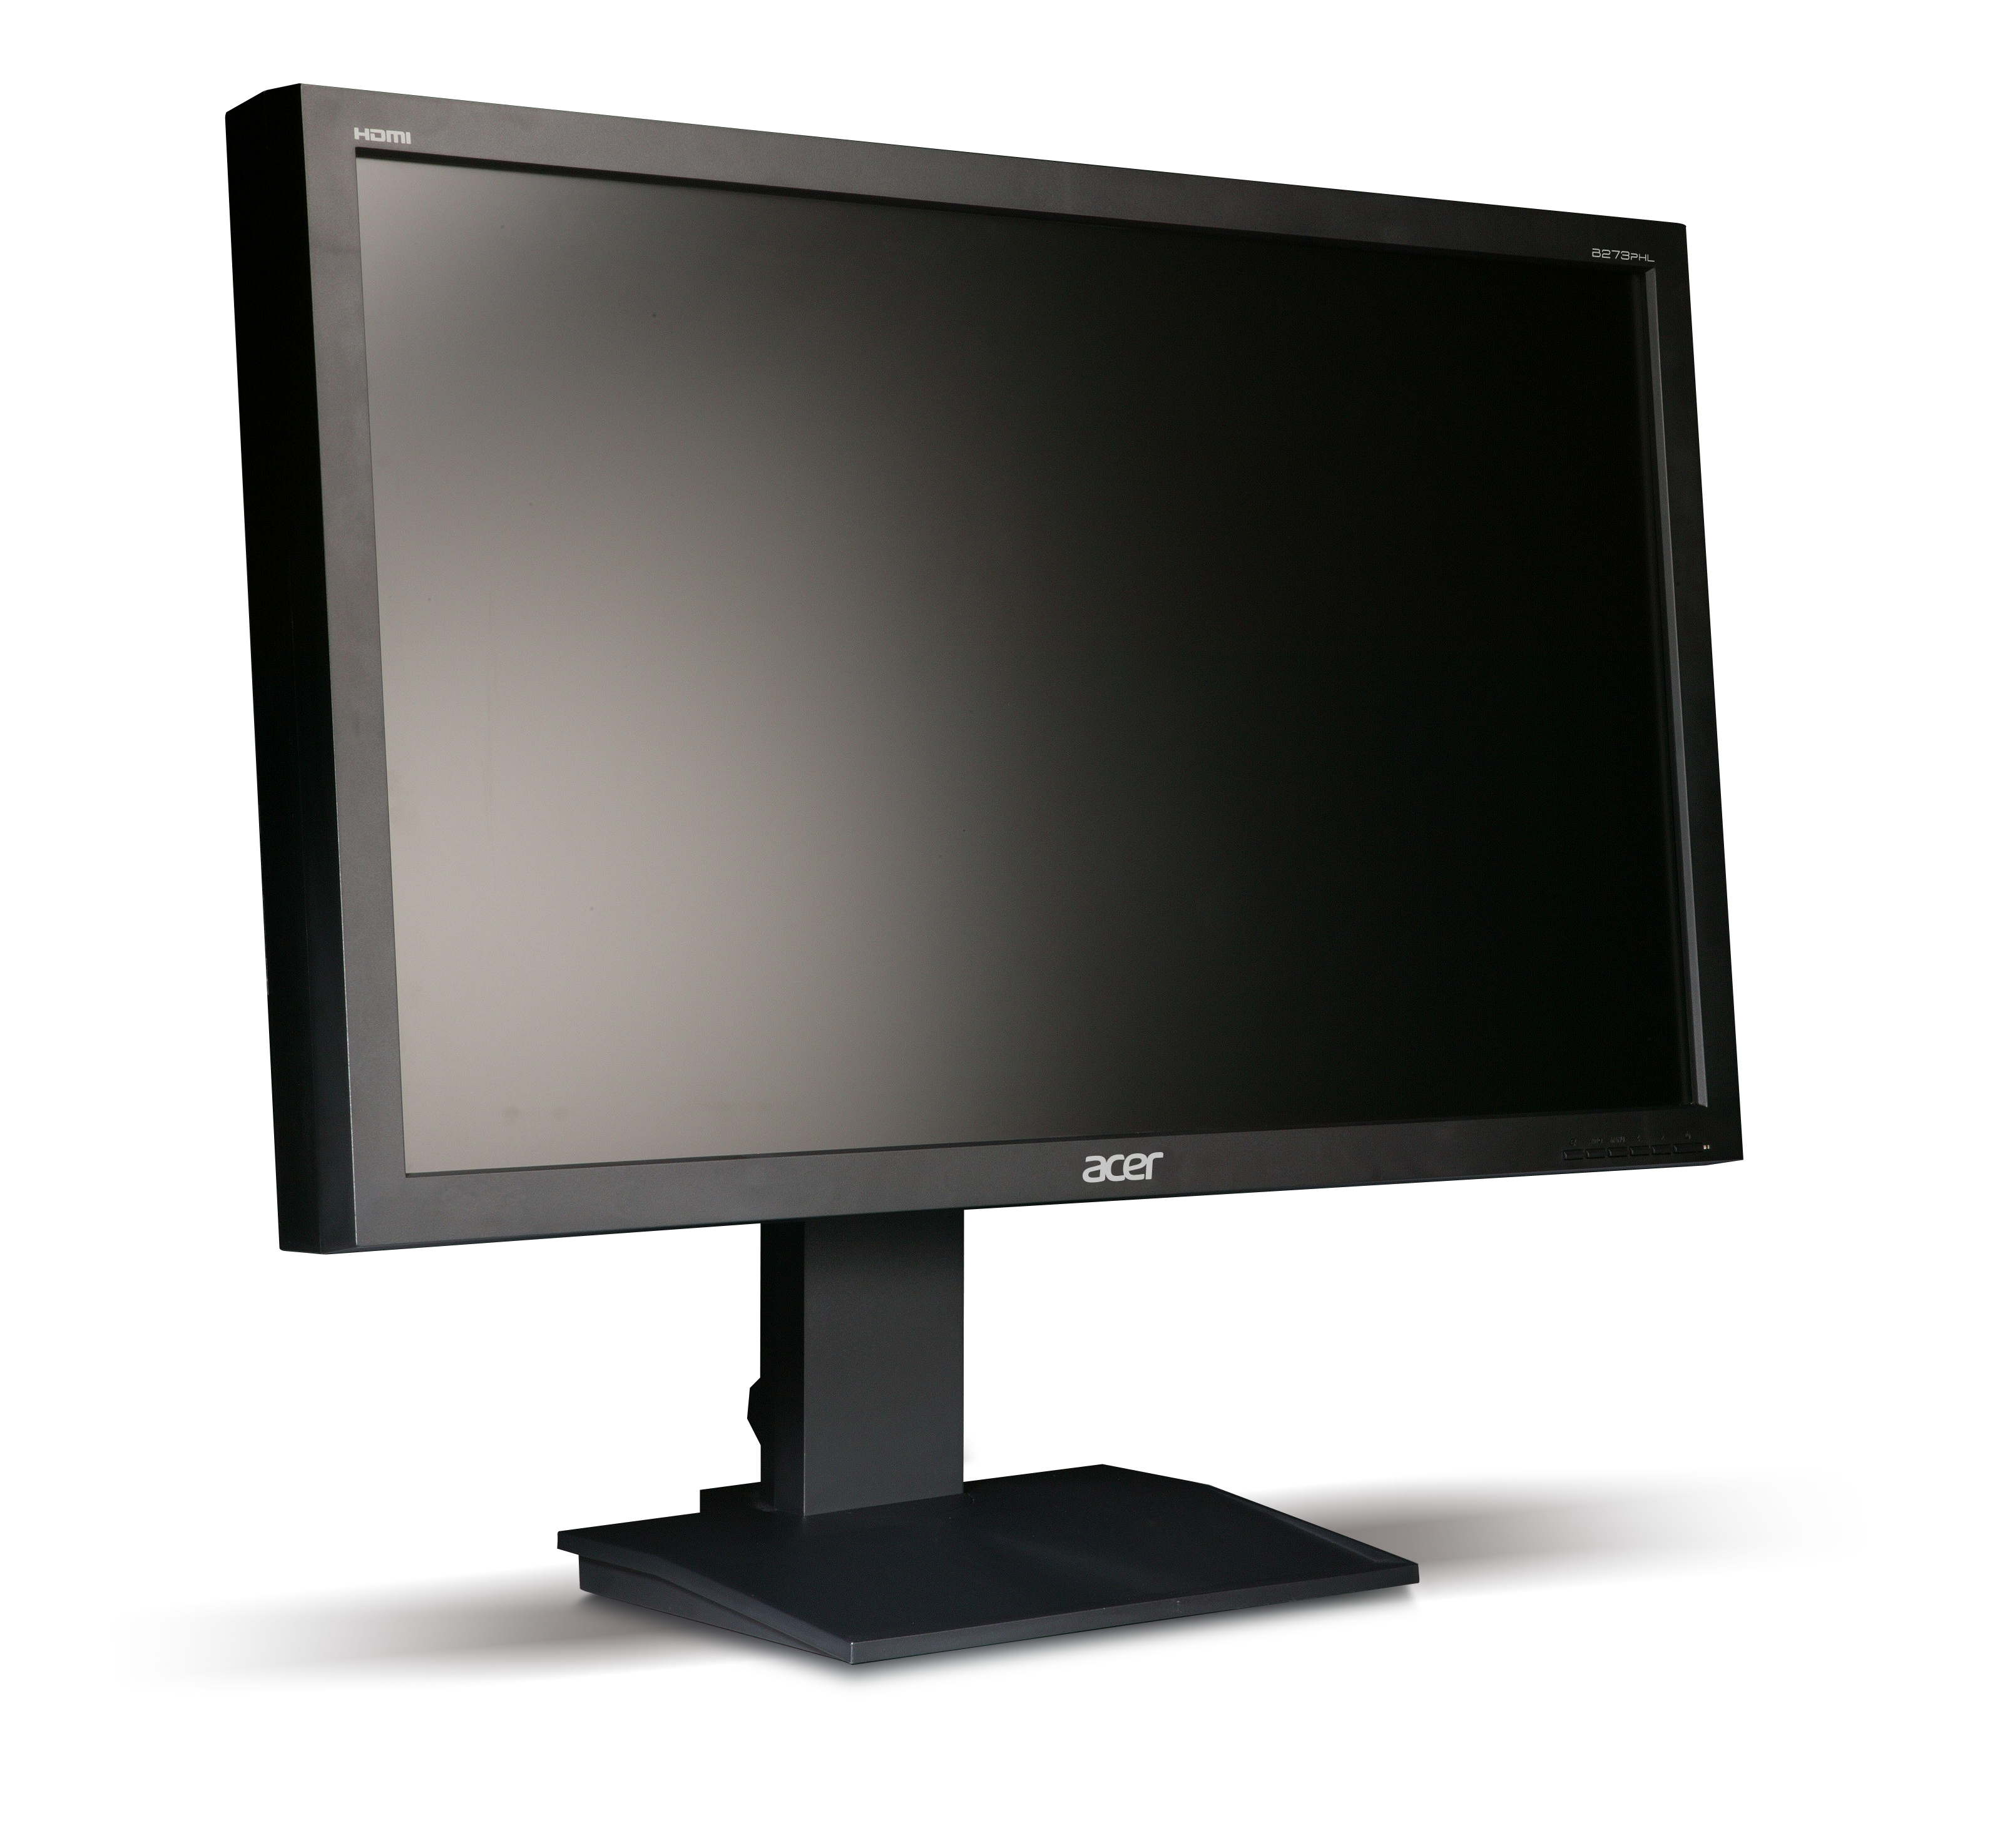 Laptop Computer Monitor Background PNG Image